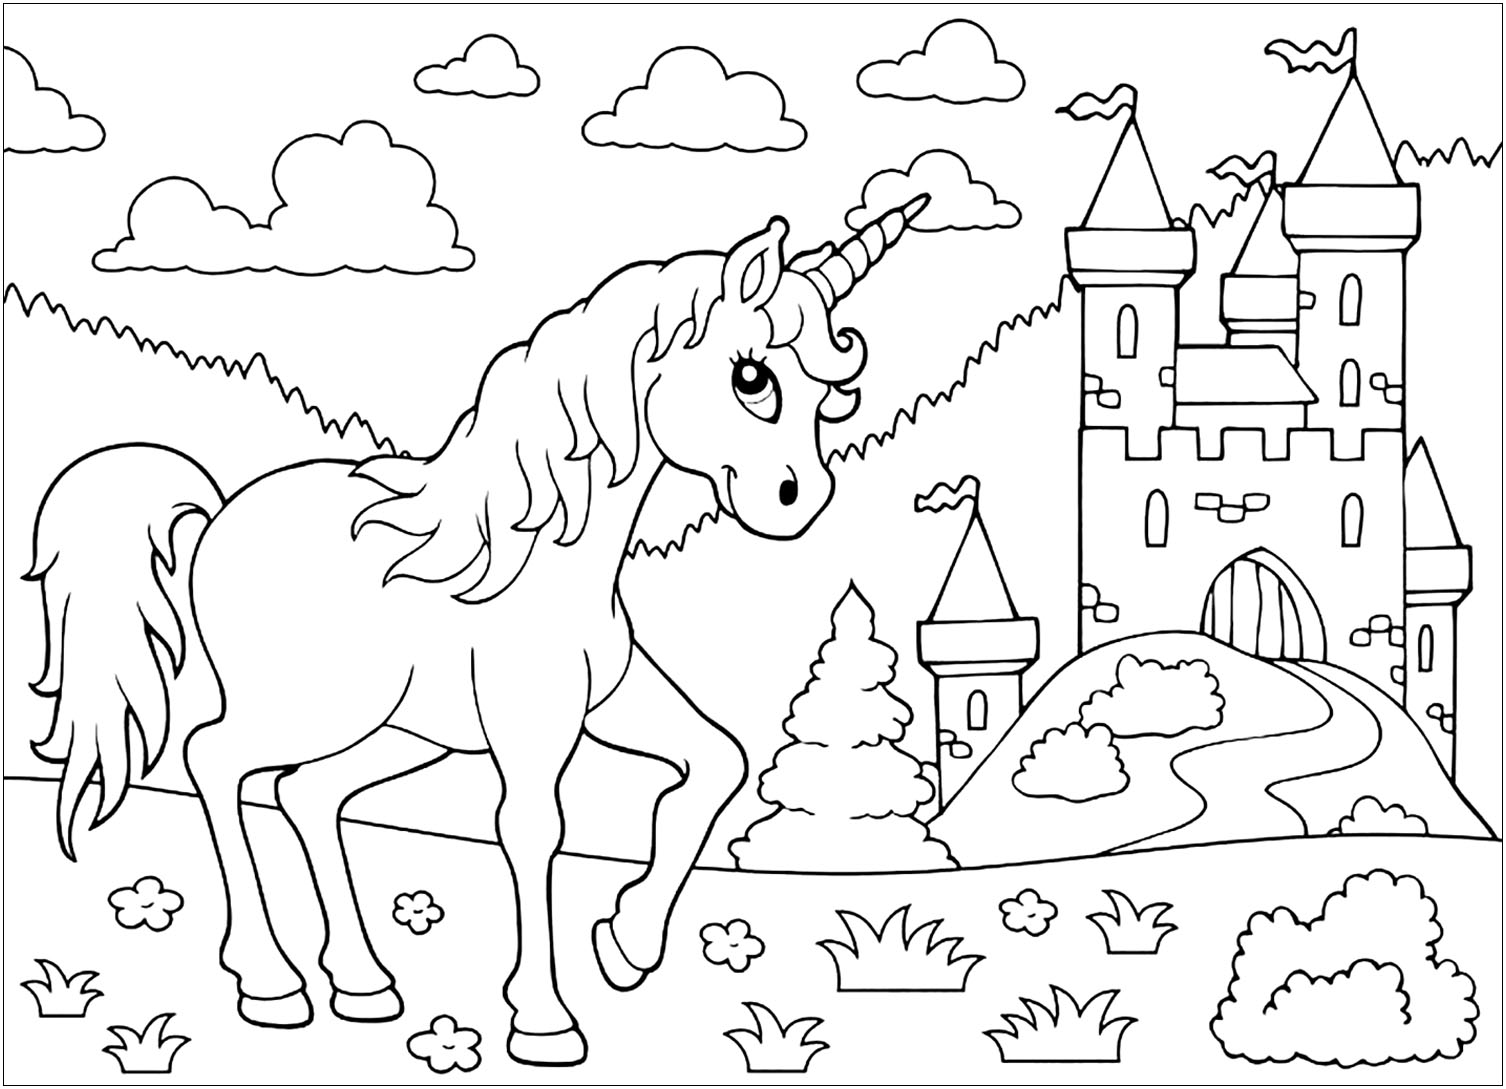 Unicorn image to download and print for children